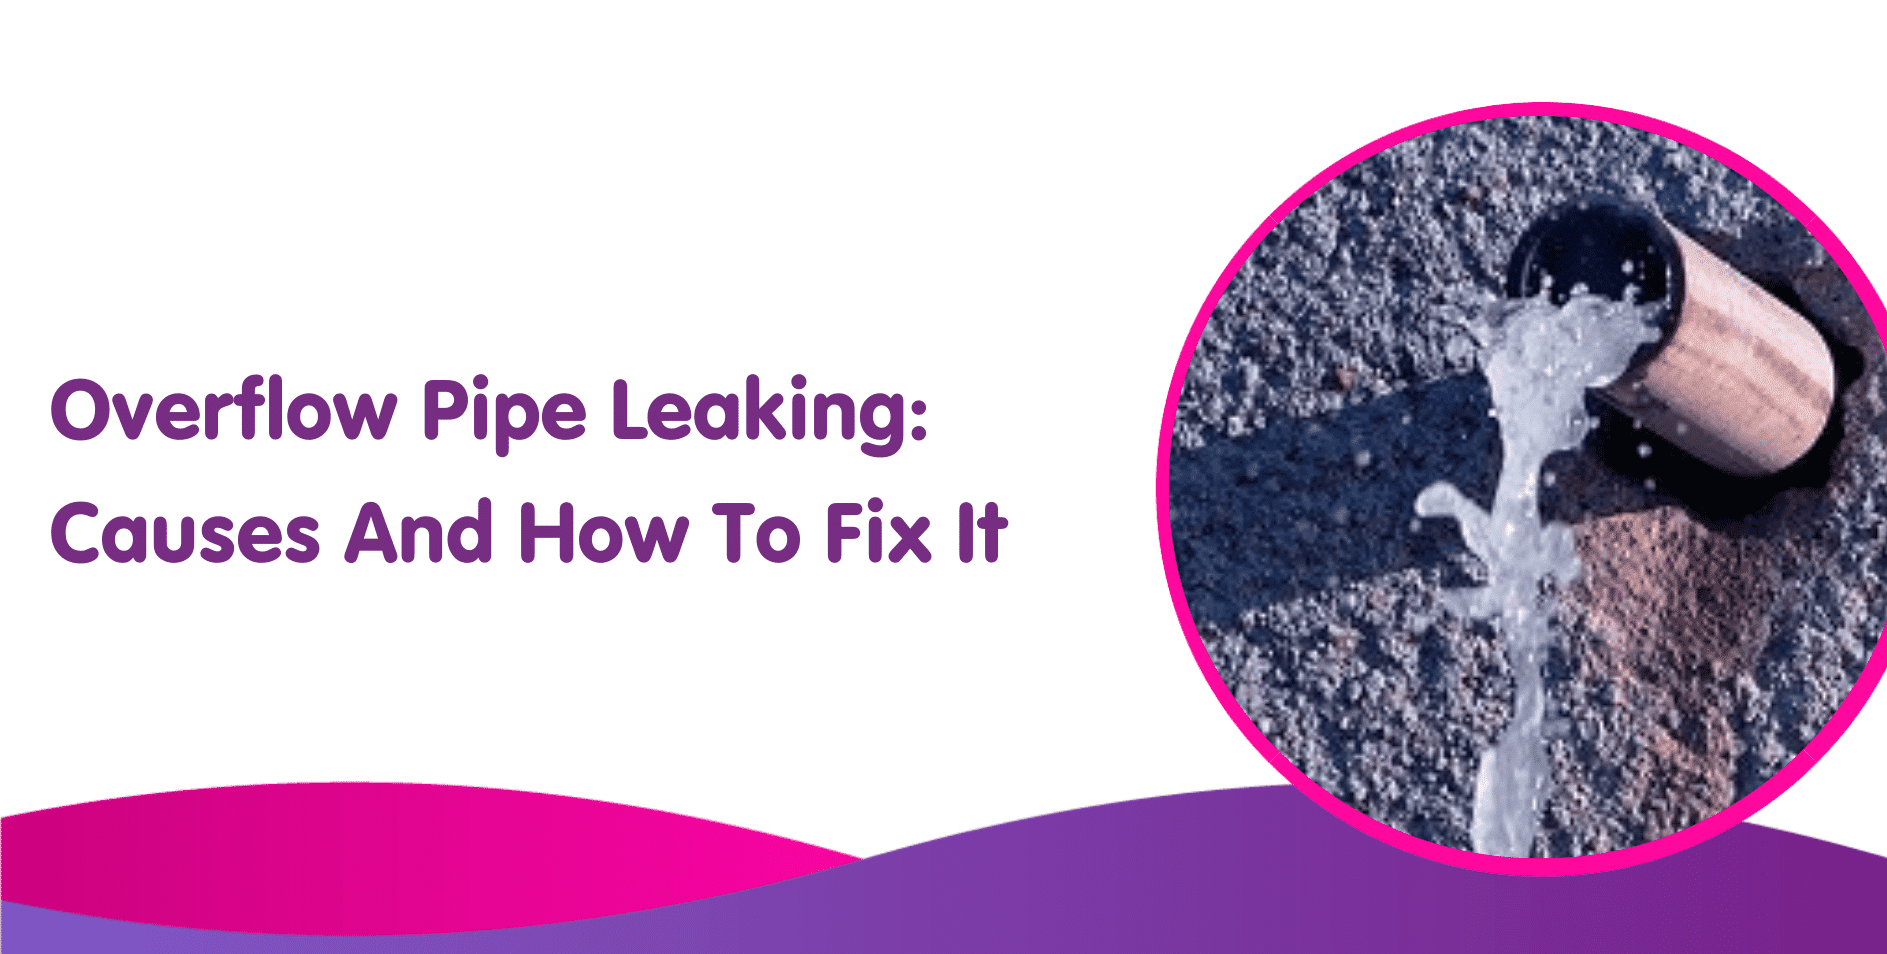 Overflow Pipe Leaking Causes And How To Fix It